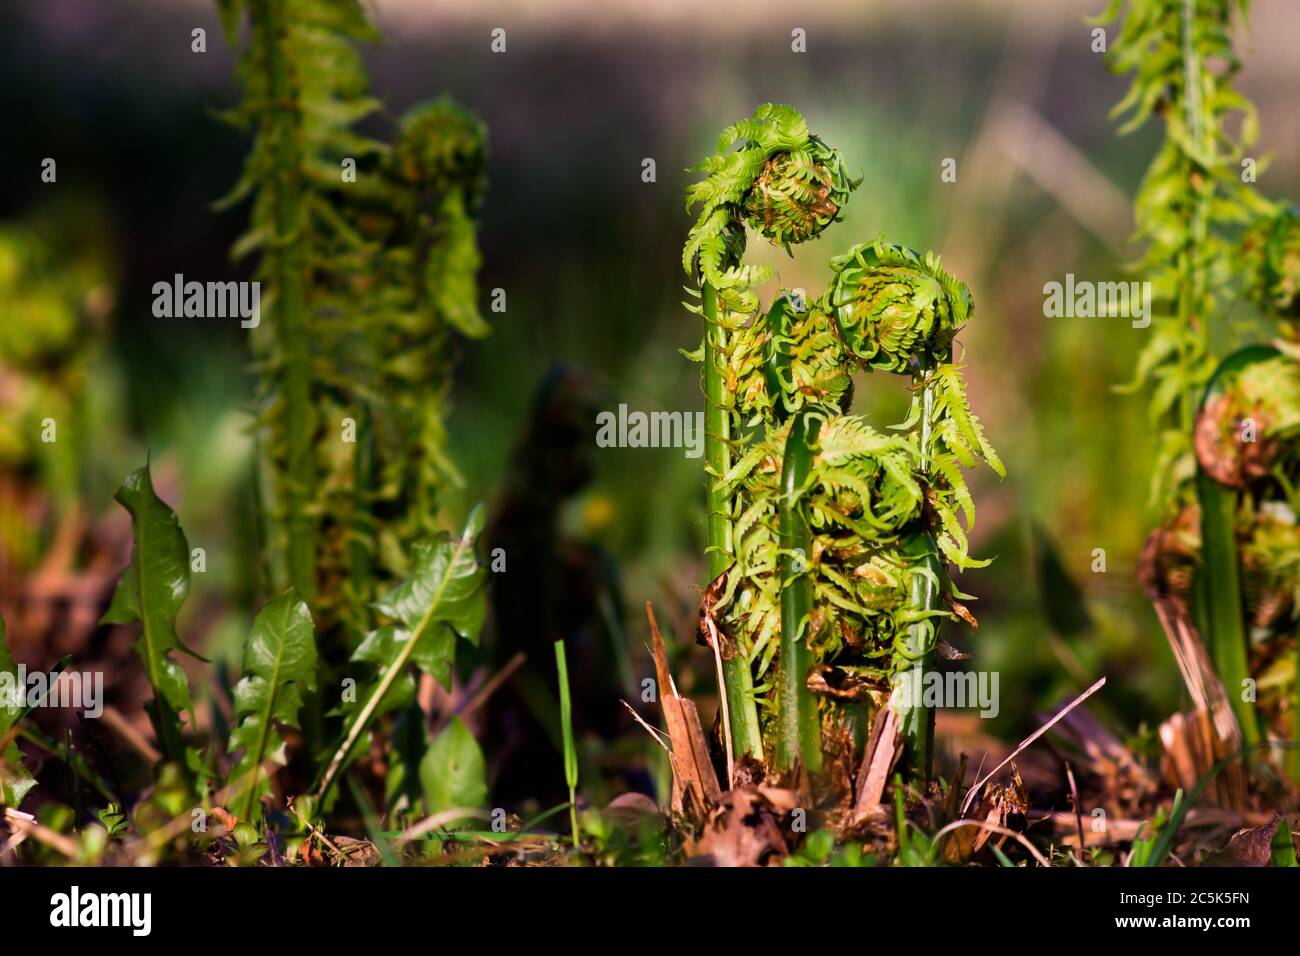 young sprouts of a fern similar to a family, in the setting sun on a blurred background, image: mom, dad and kids. Stock Photo